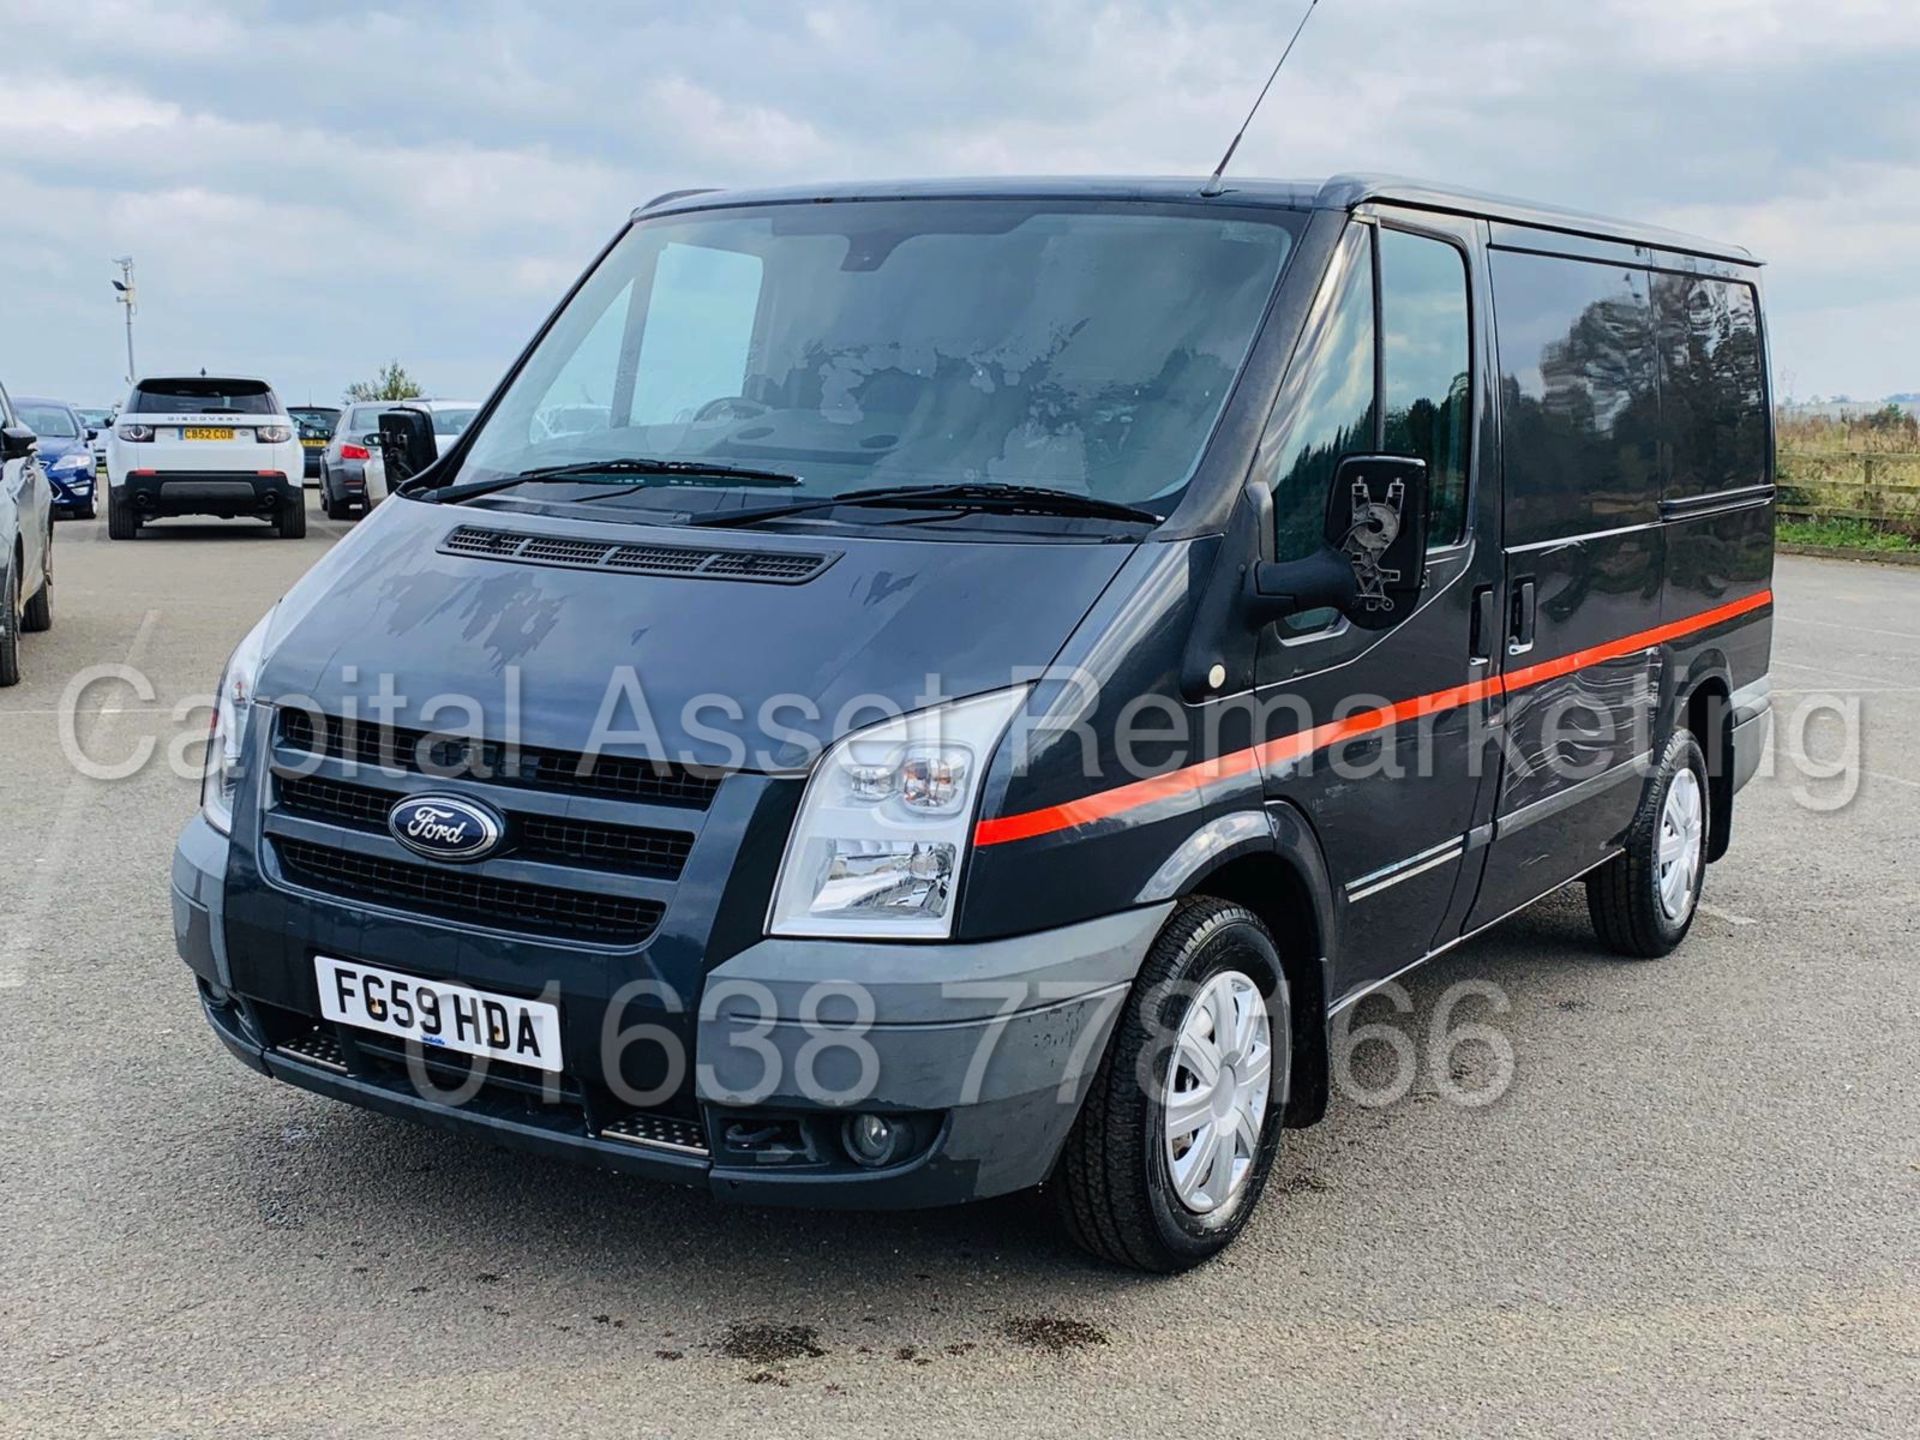 (ON SALE) FORD TRANSIT 115 T260 *TREND* SWB *A-TEAM EDITION* (2010 MODEL) '2.2 TDCI 115 BHP-6 SPEED' - Image 3 of 24